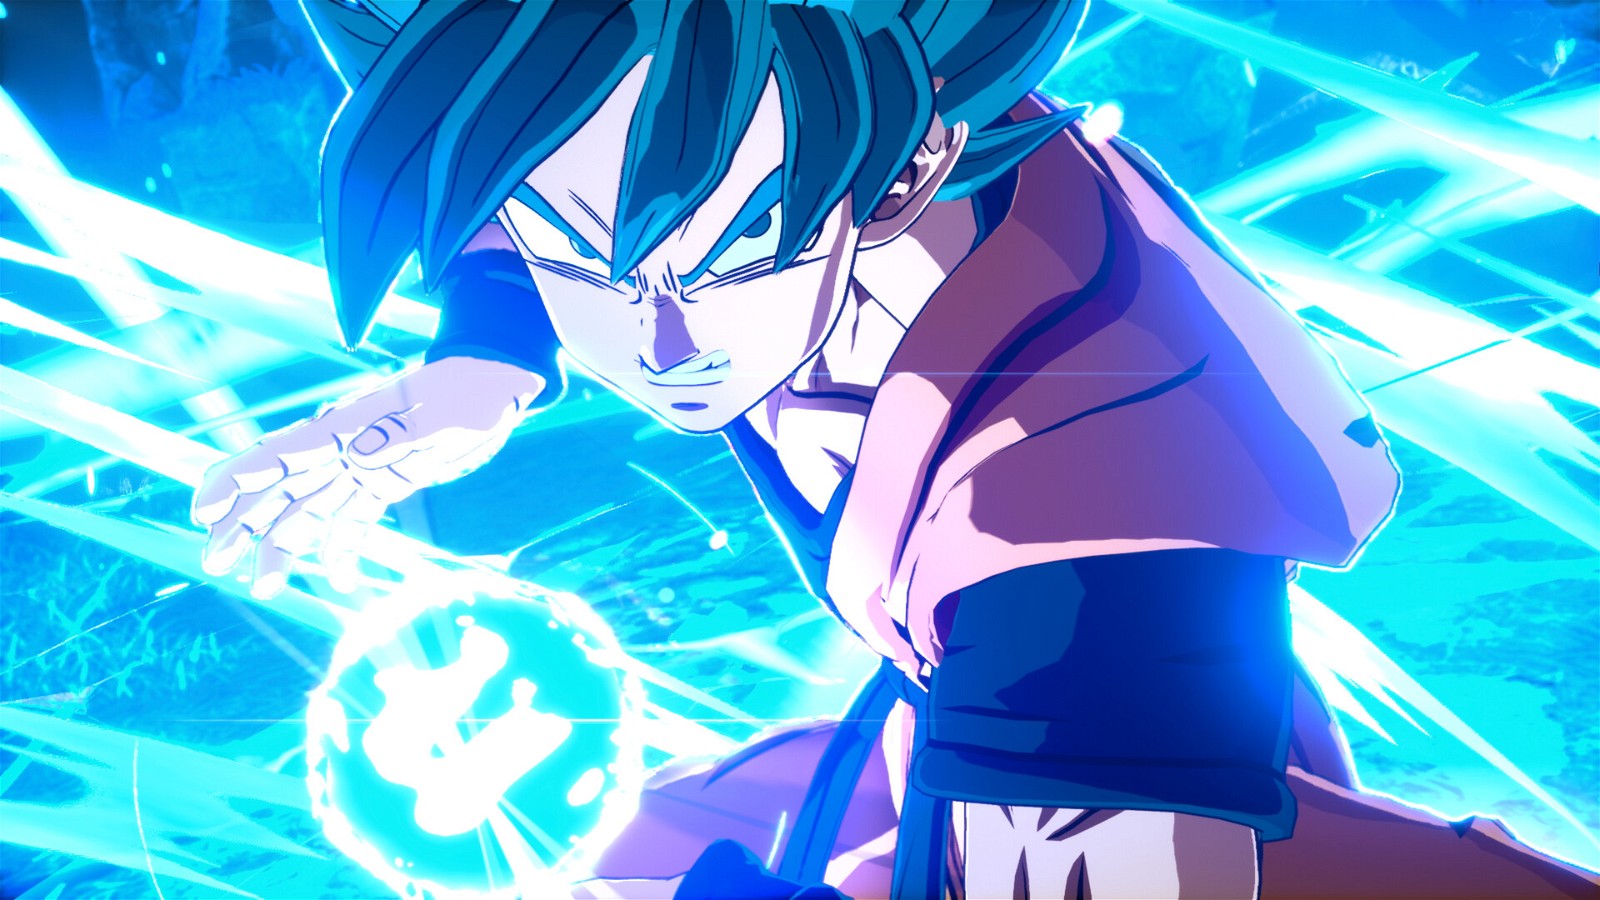 Ultra Instinct is the highest form Goku can achieve in the franchise.